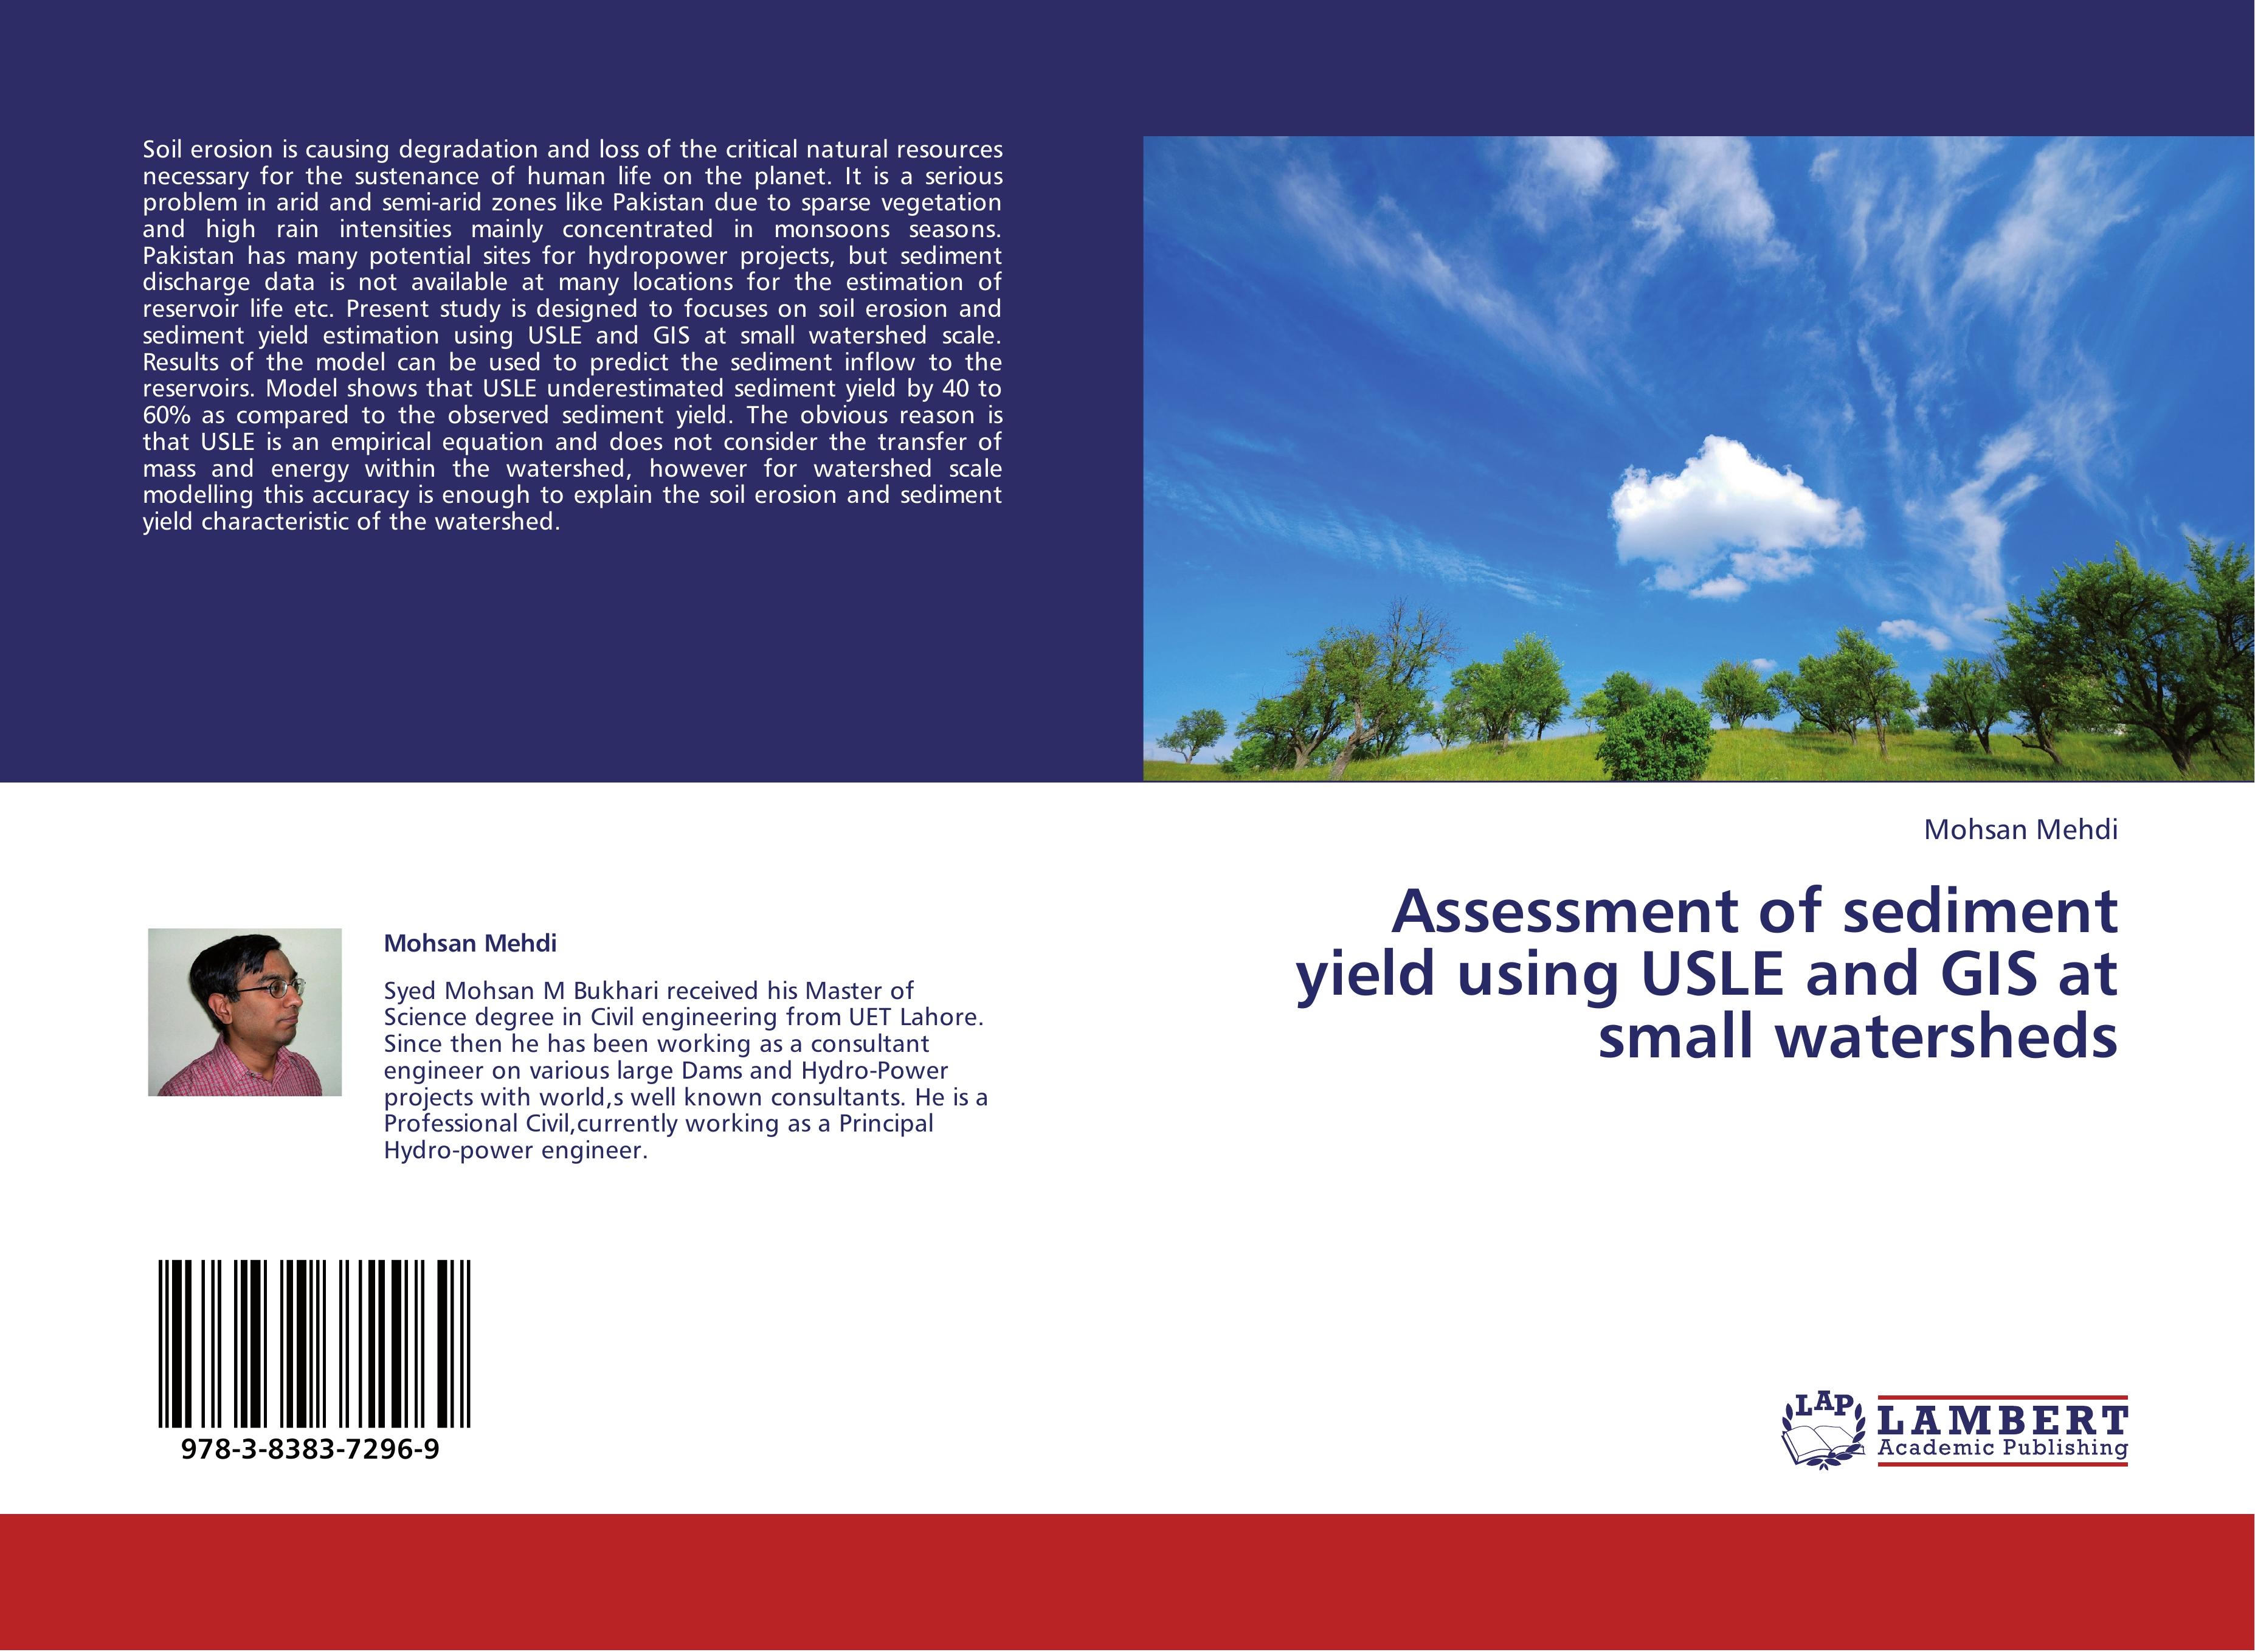 Assessment of sediment yield using USLE and GIS at small watersheds - Mohsan Mehdi